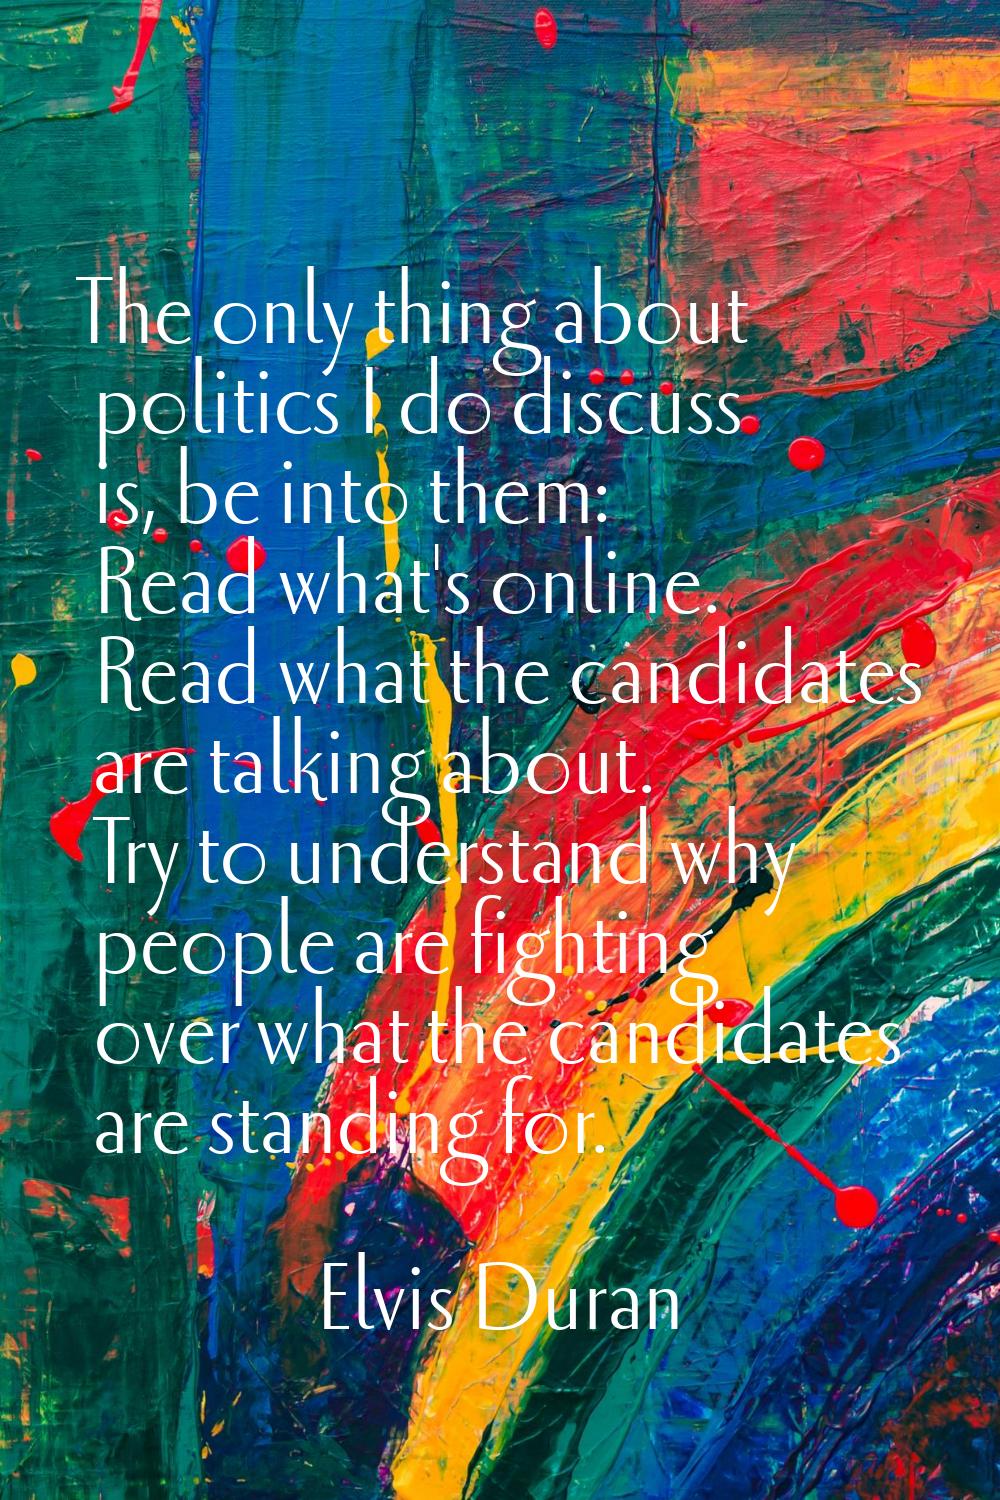 The only thing about politics I do discuss is, be into them: Read what's online. Read what the cand